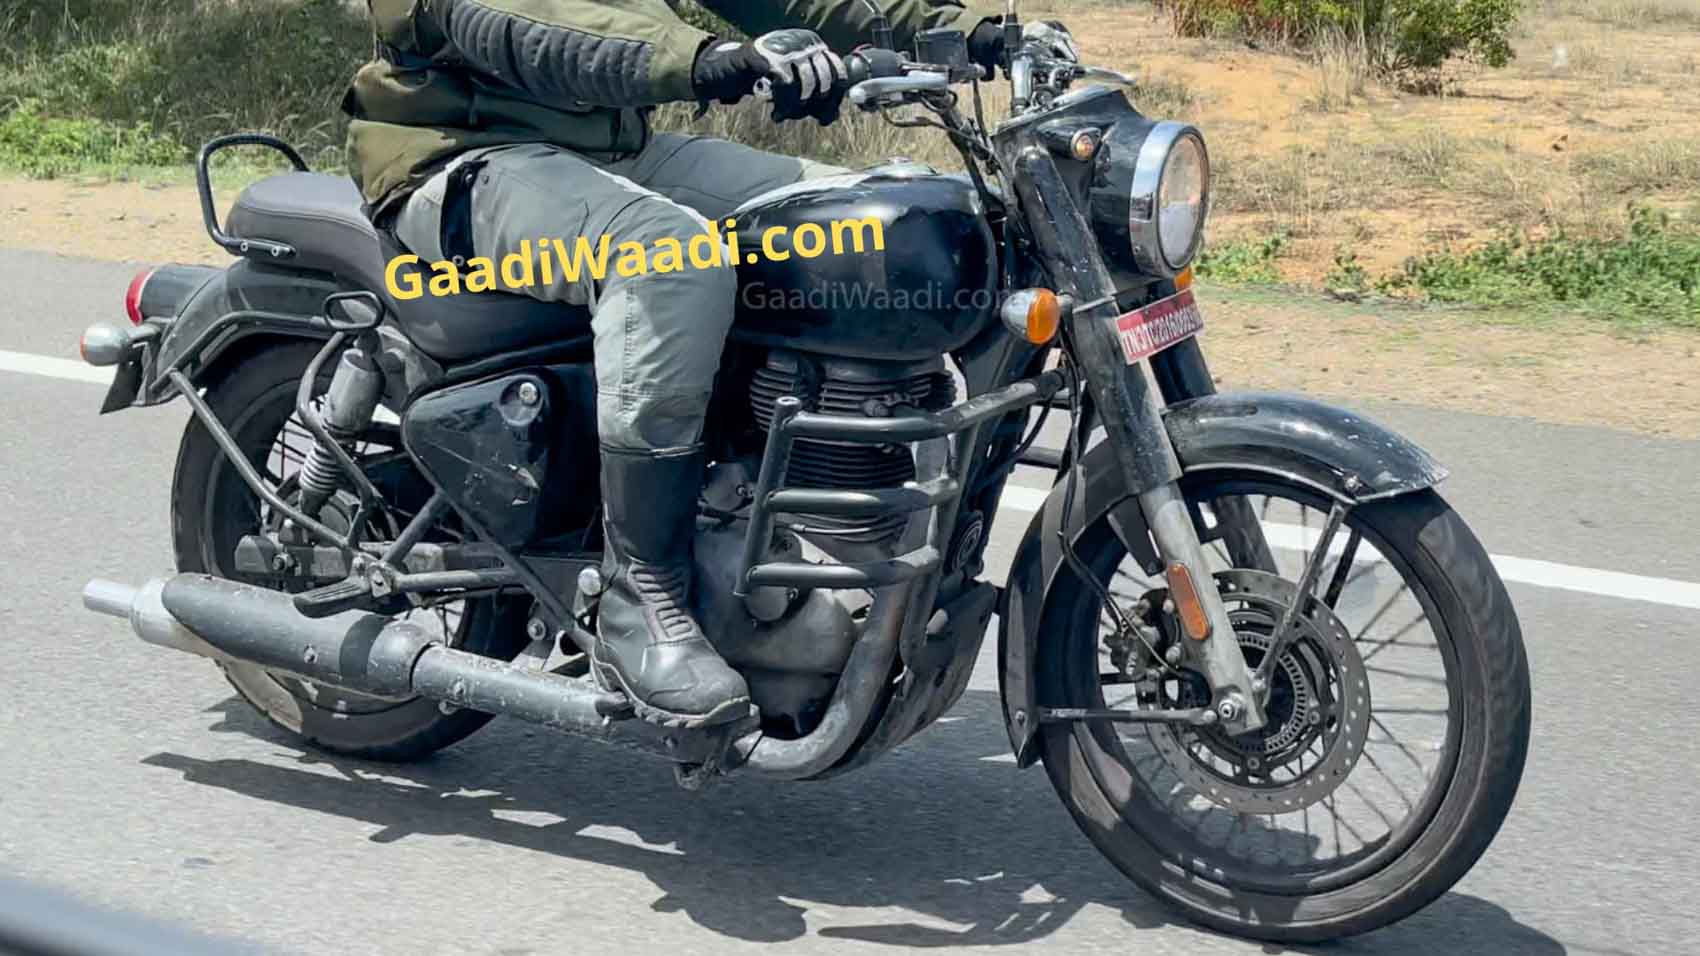 3 350450 CC Royal Enfield Bikes This Year In India